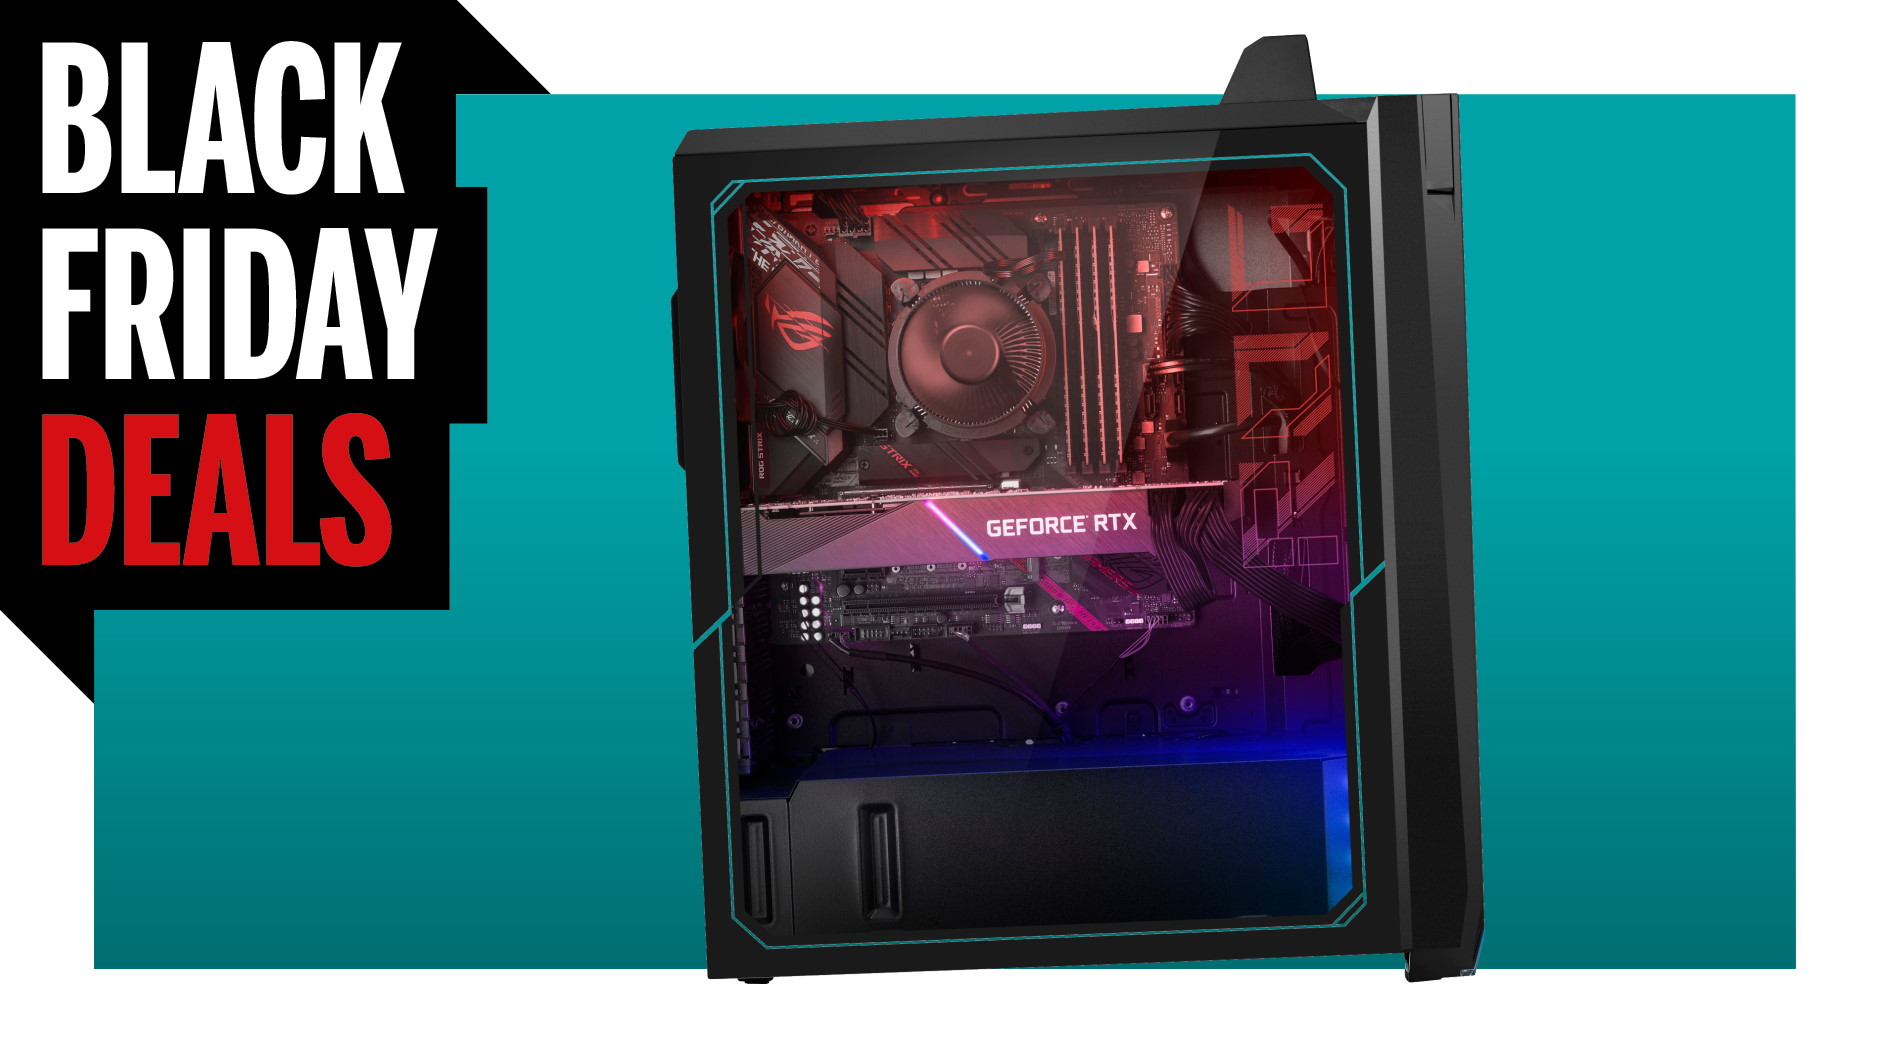  This Asus ROG RTX 3060 gaming PC with Ryzen 7 CPU is $250 off at Best Buy 